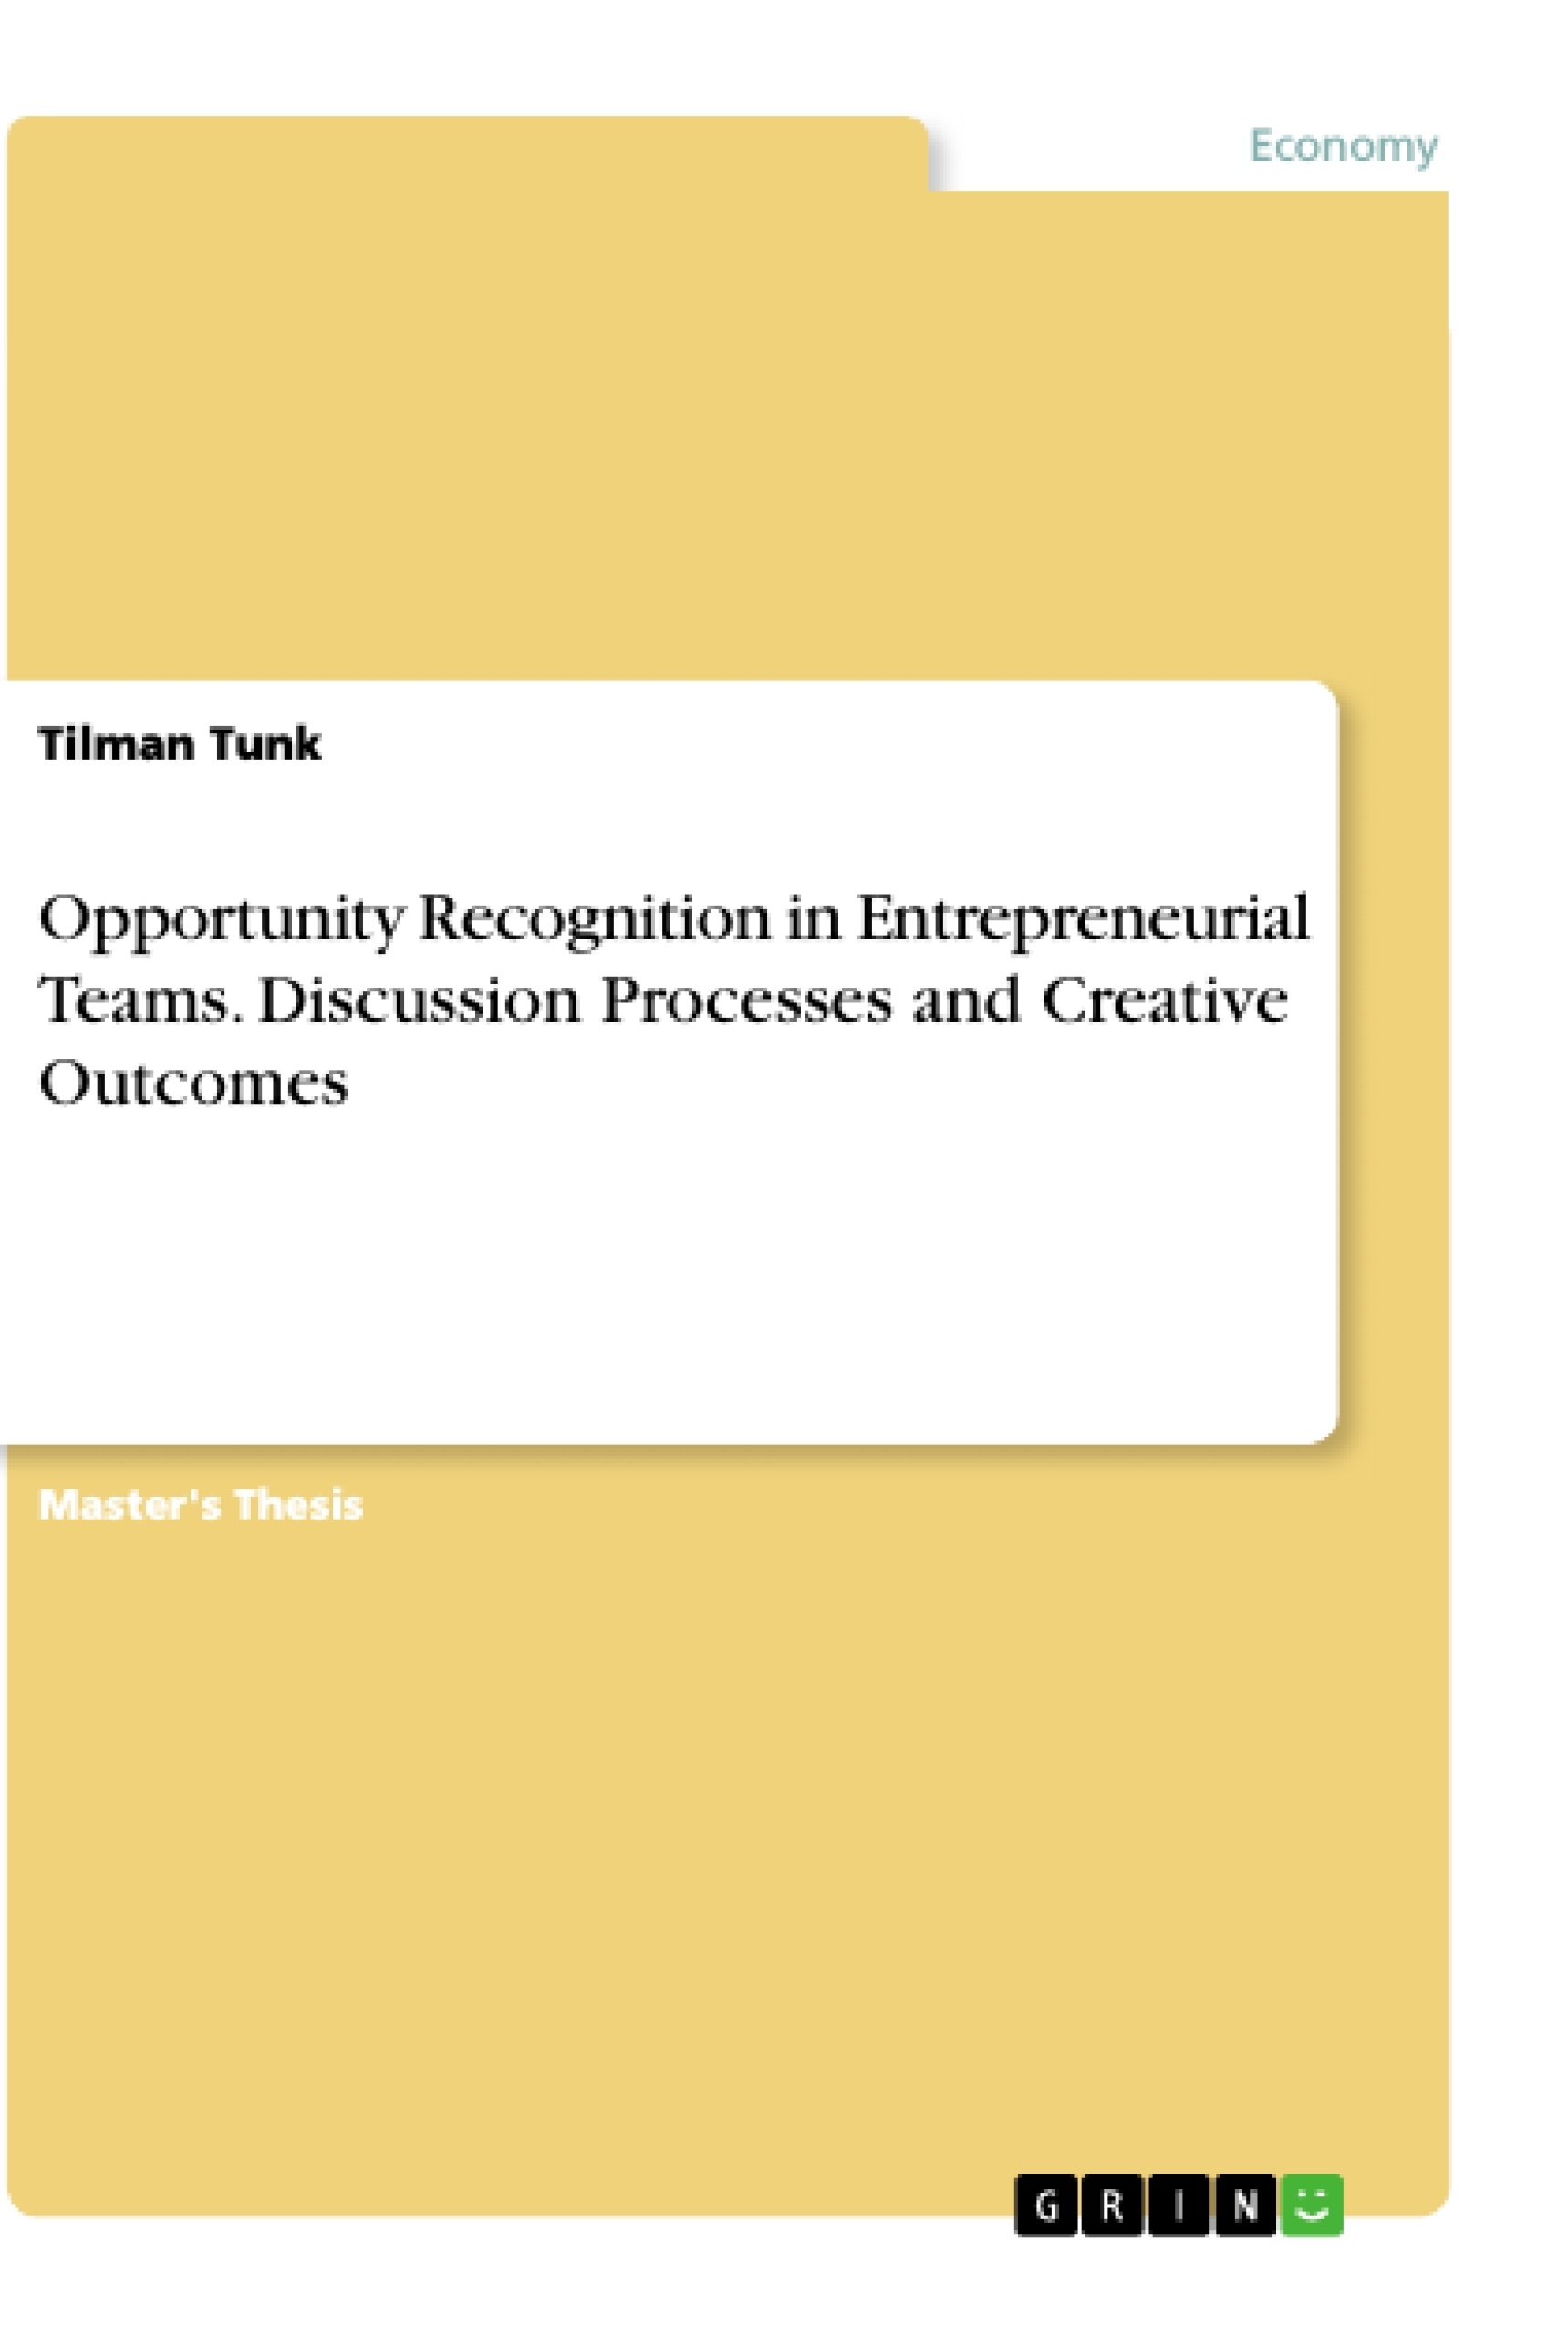 Título: Opportunity Recognition in Entrepreneurial Teams. Discussion Processes and Creative Outcomes